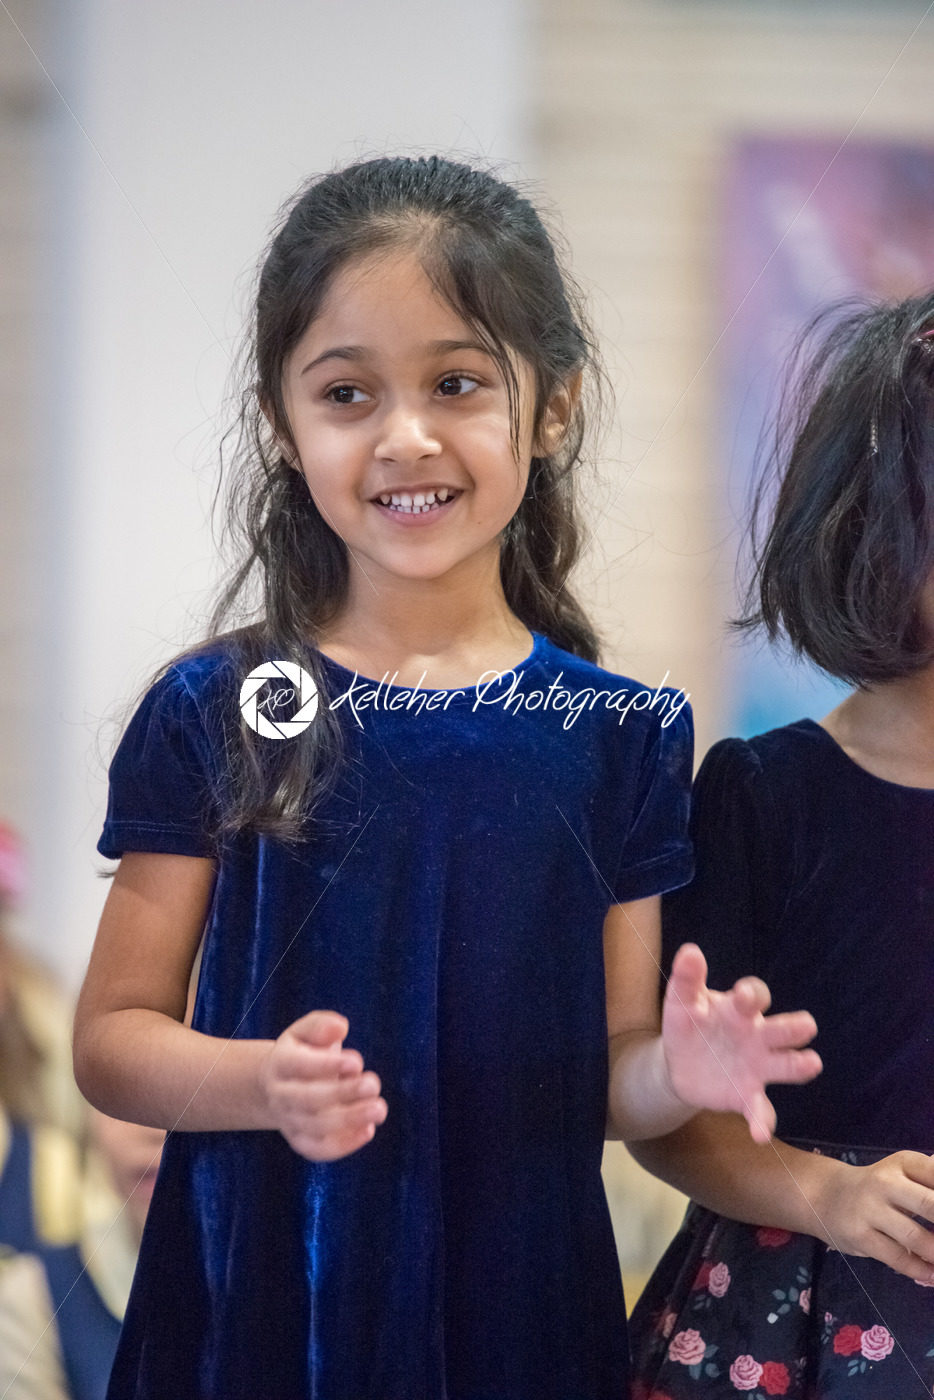 ROSEMONT, PA – DECEMBER 14: Winter Concert at The Agnes Irwin School - Kelleher Photography Store